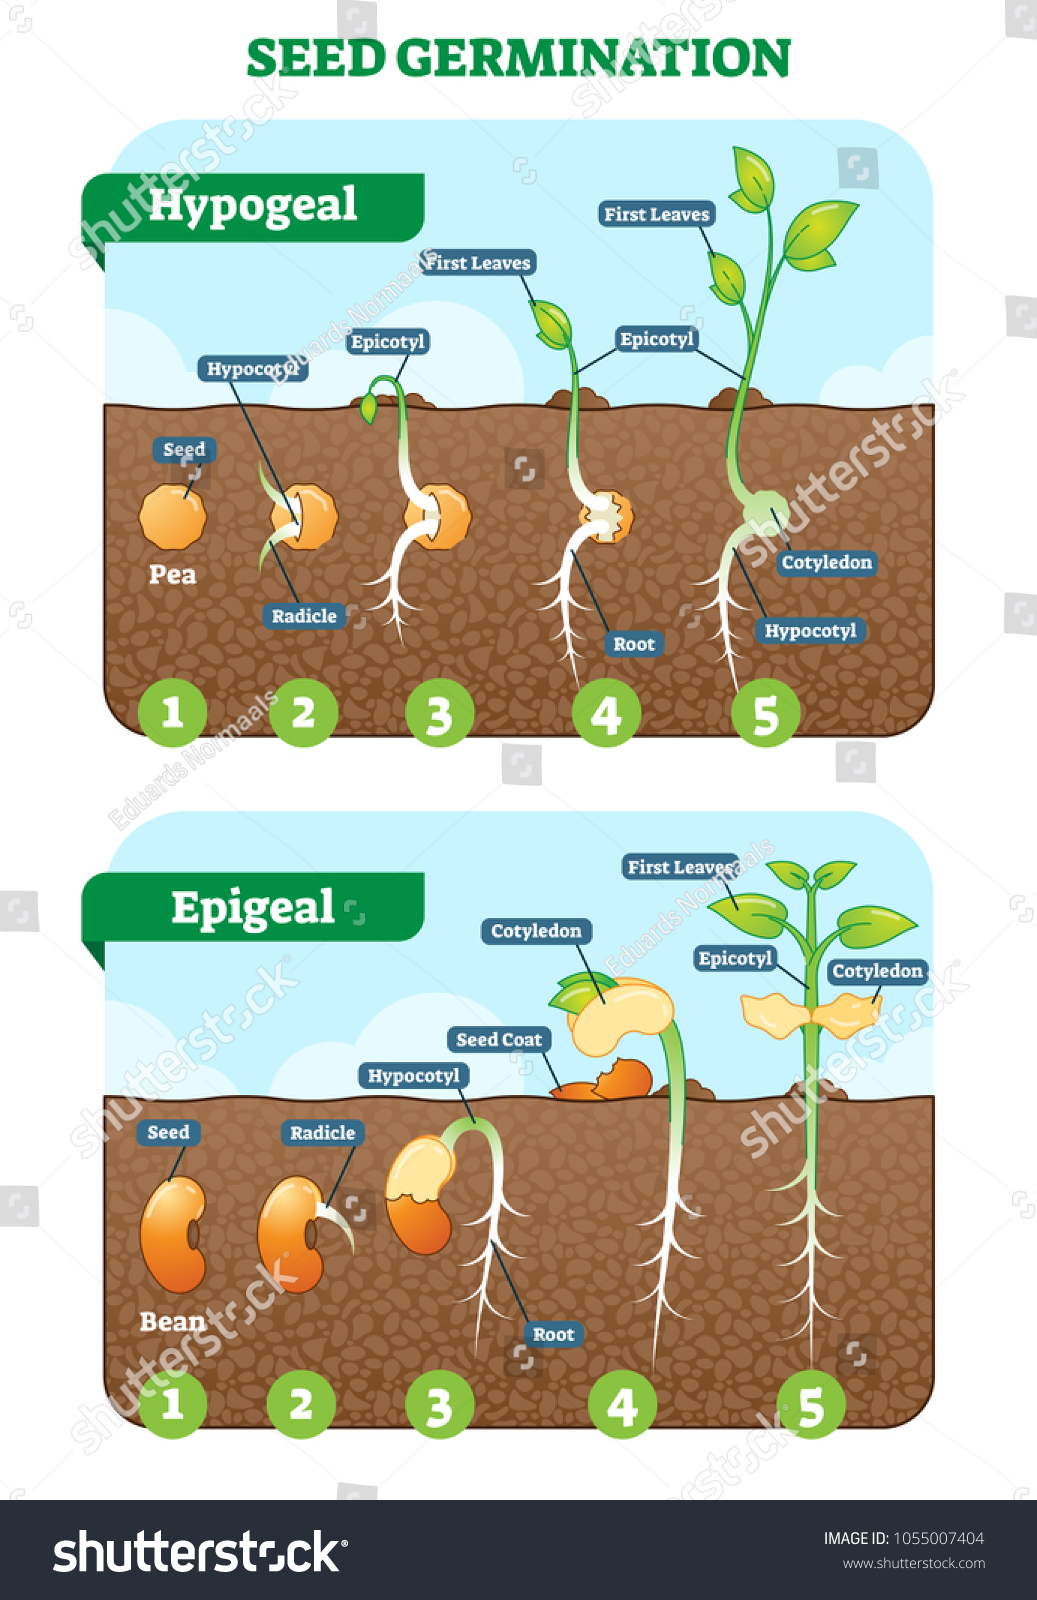 Seed germination cross section vector illustration in stages. Hypogeal and epigeal types. Plant gardening information. #1055007404